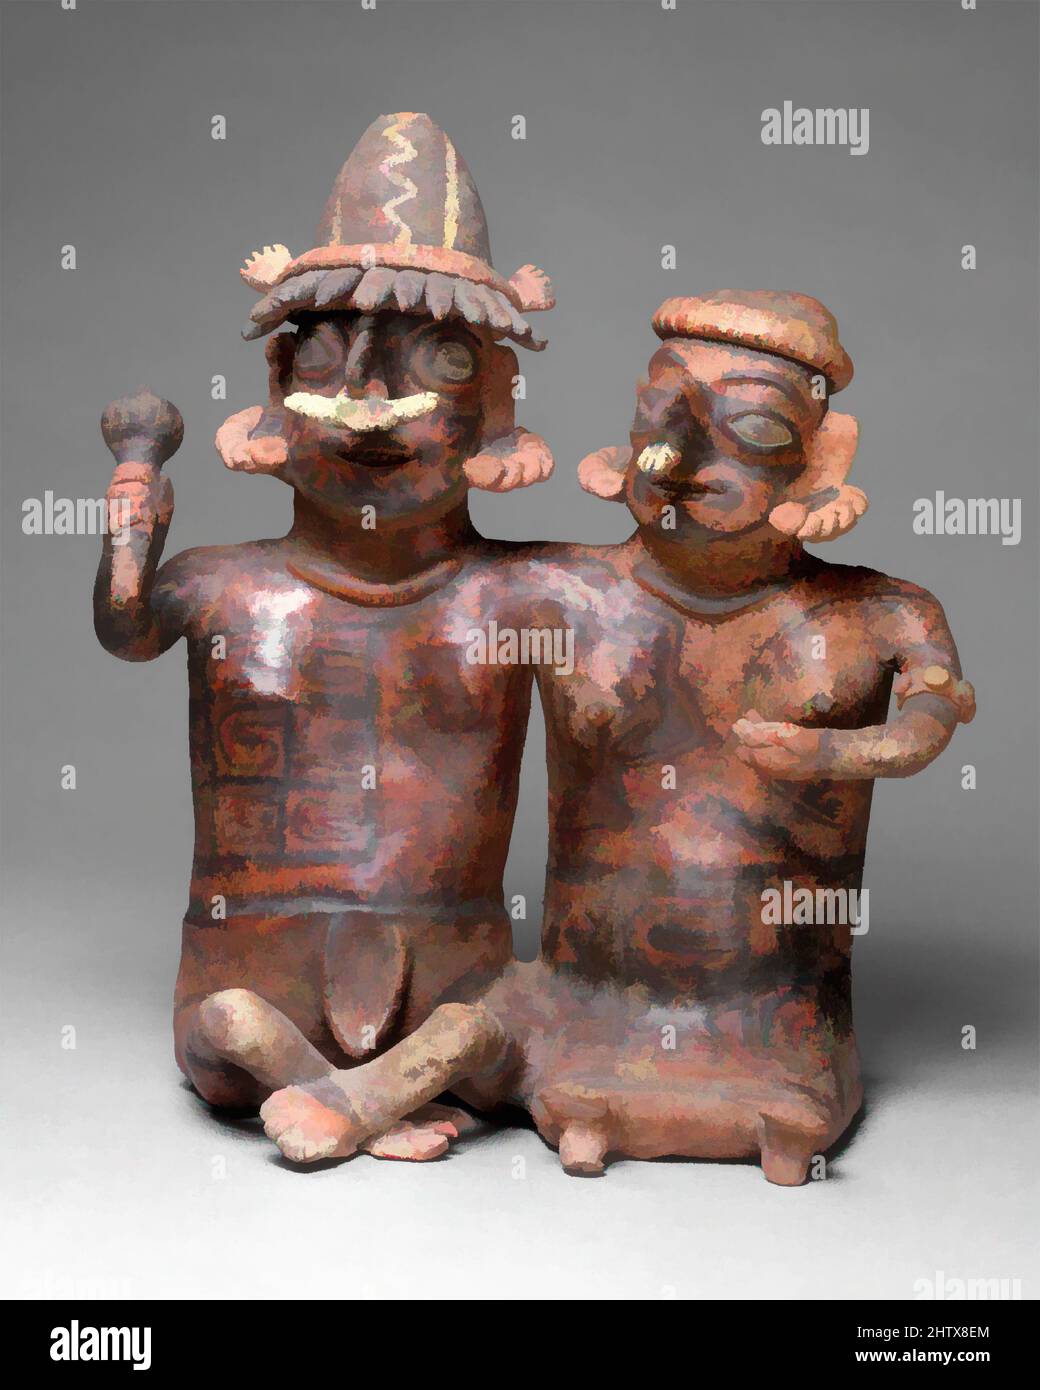 Art inspired by Ancestor Pair, 1st century B.C.–A.D. 3rd century, Mexico, Mesoamerica, Nayarit, Ixtlan del Río, Ceramic, H. 17 1/4 x W. 15 1/4 in. (43.8 x 38.7 cm), Ceramics-Sculpture, Classic works modernized by Artotop with a splash of modernity. Shapes, color and value, eye-catching visual impact on art. Emotions through freedom of artworks in a contemporary way. A timeless message pursuing a wildly creative new direction. Artists turning to the digital medium and creating the Artotop NFT Stock Photo